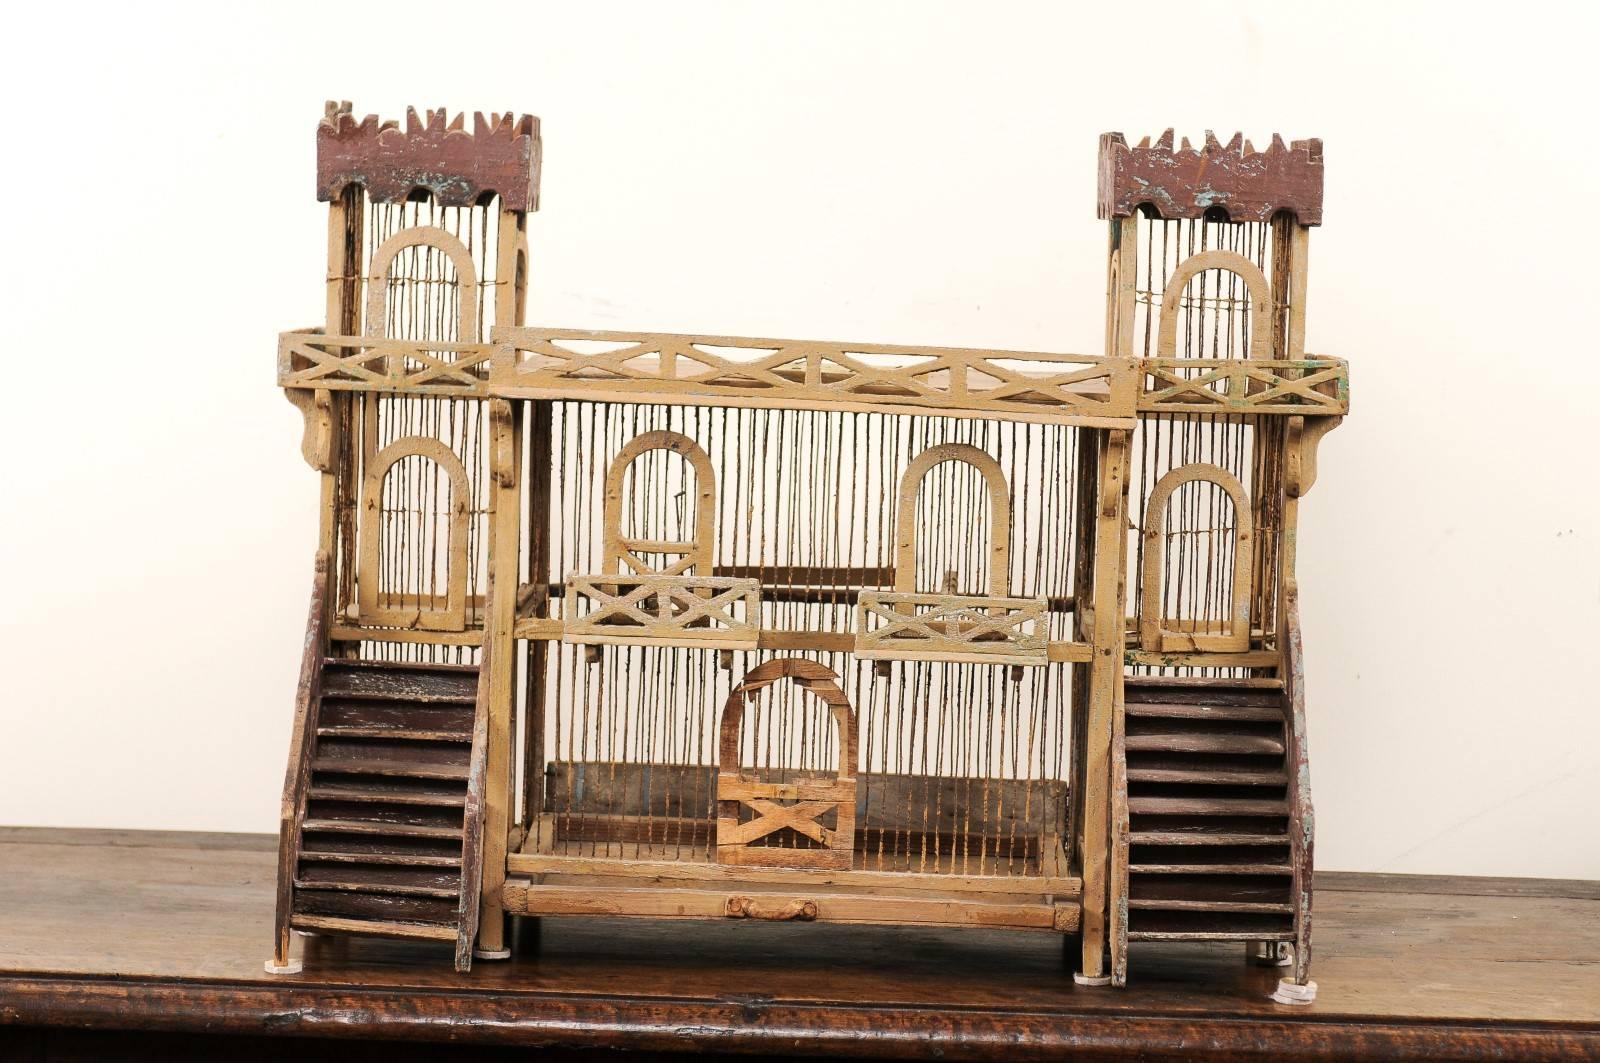 An Italian mid-20th century wood bird cage. This vintage Italian birdcage has been lovingly handcrafted and features a two storied main structure which is flanked by twin towers and entry stairs. There are x-stylized window boxes and upper railing